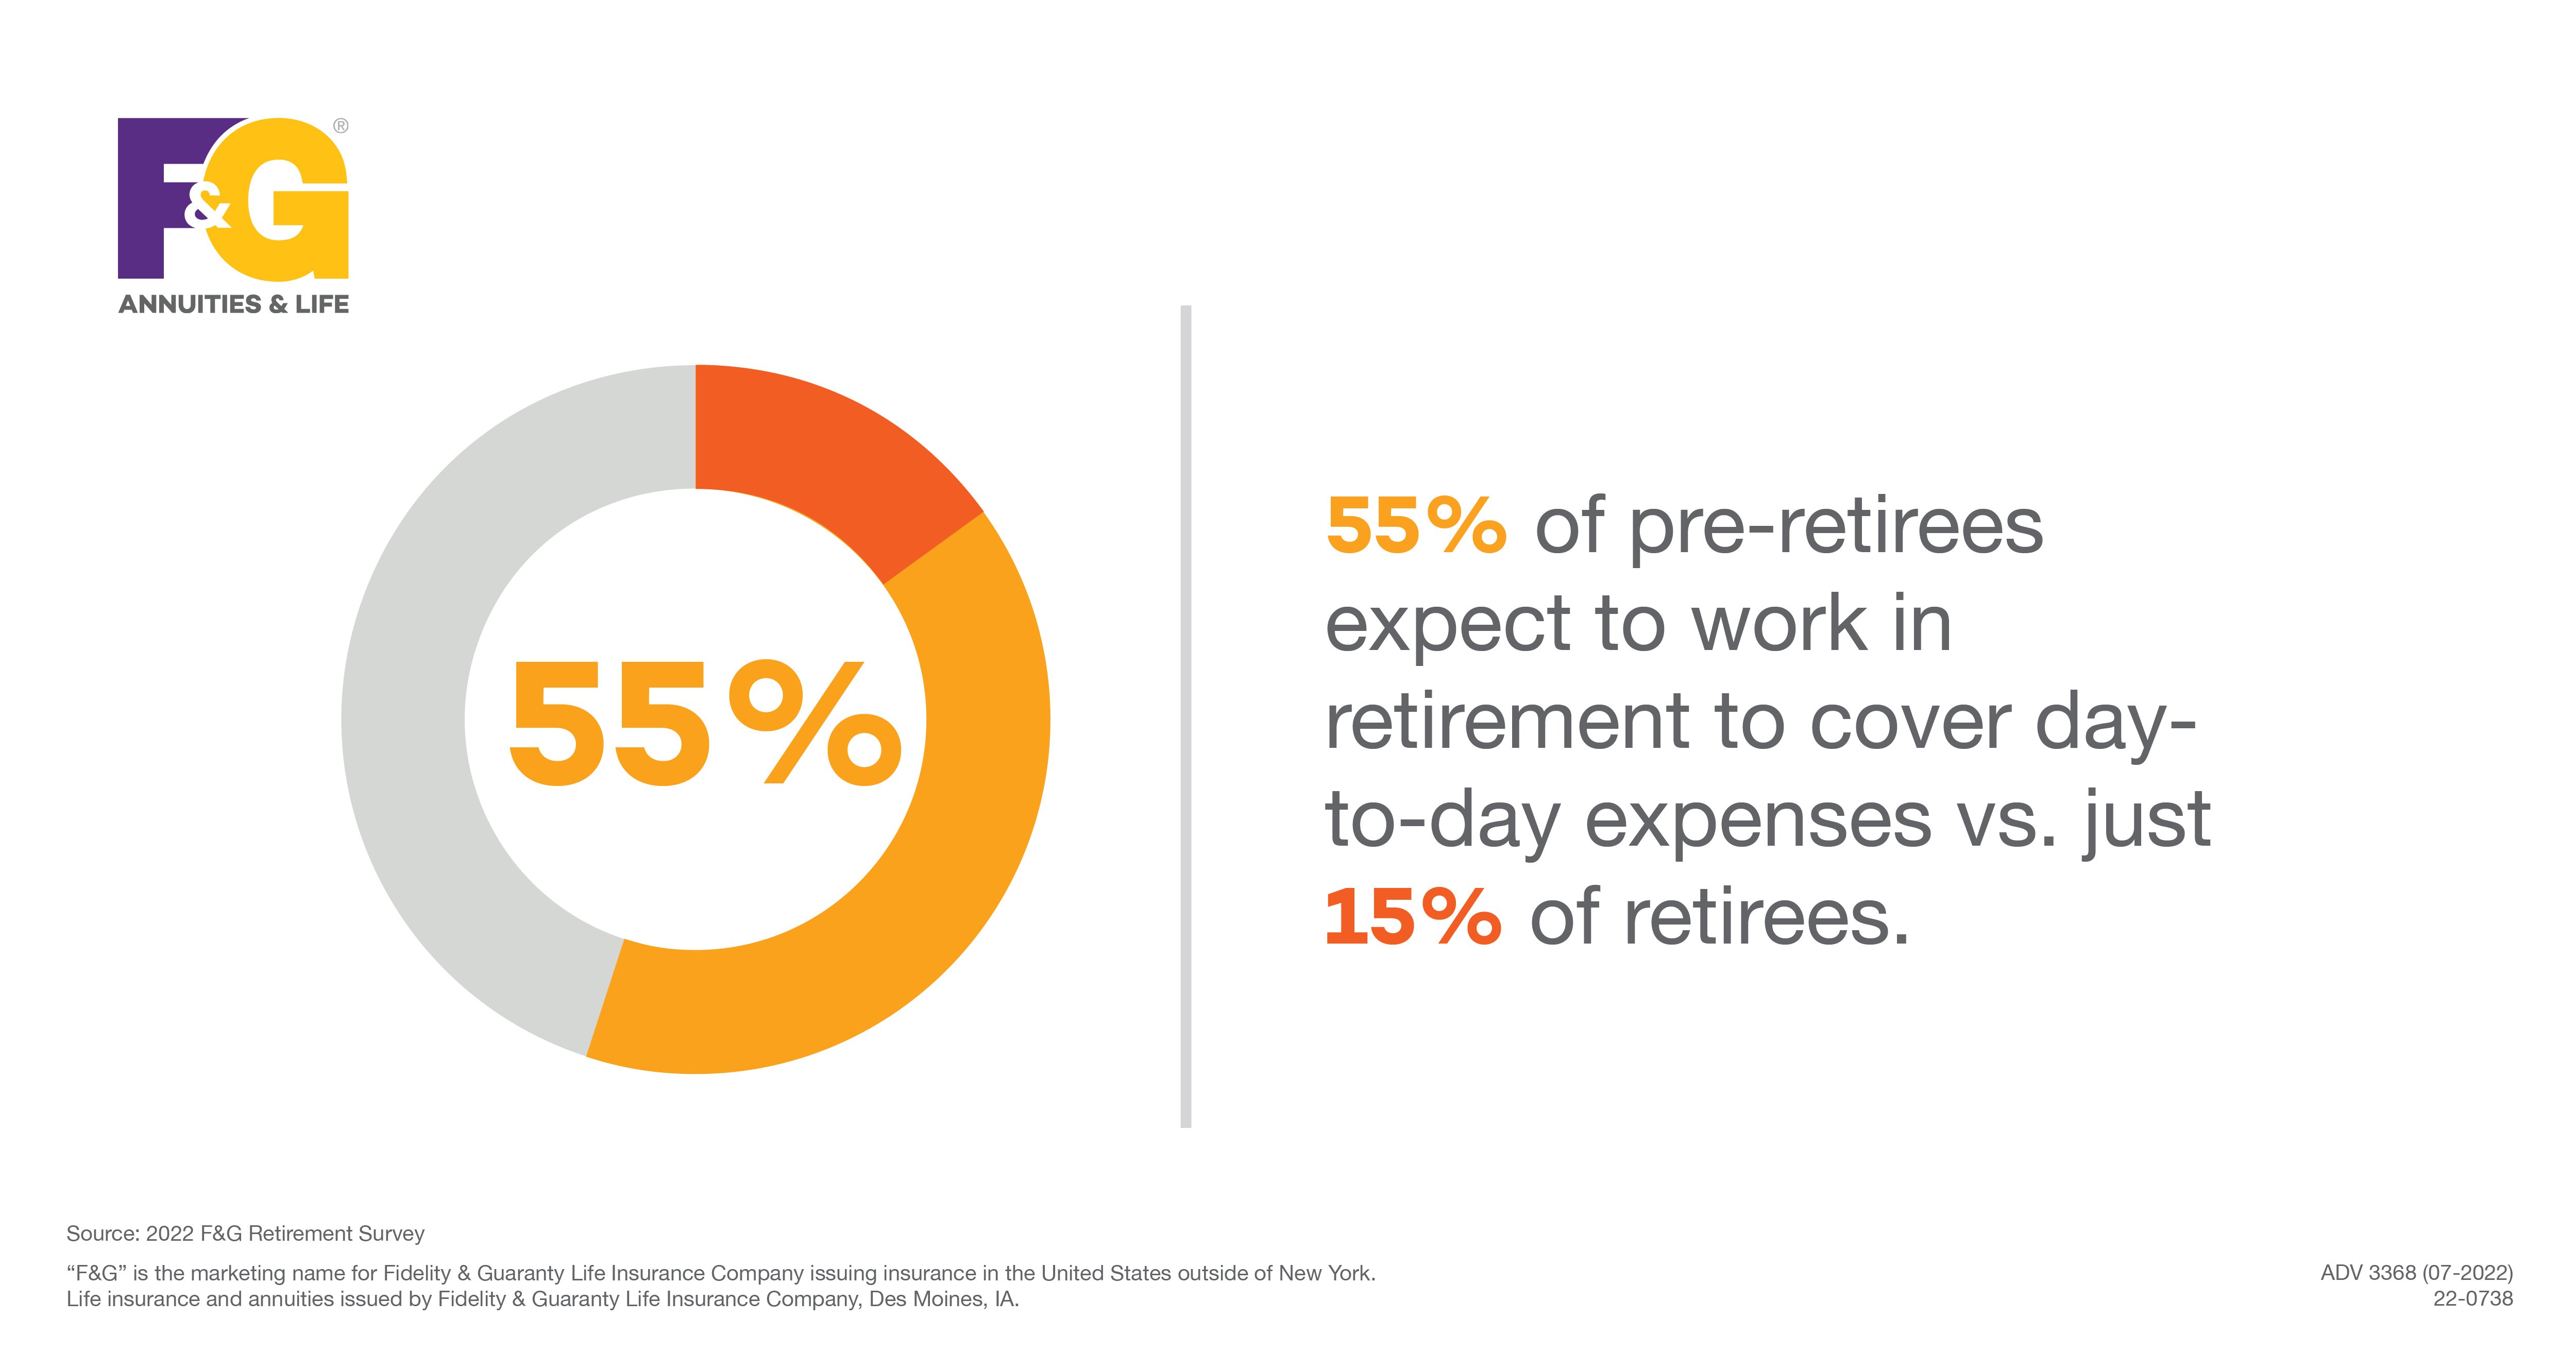 Text that reads: 55% of pre-retirees expect to work in retirement to cover day-to-day expenses vs. just 15% of retirees.